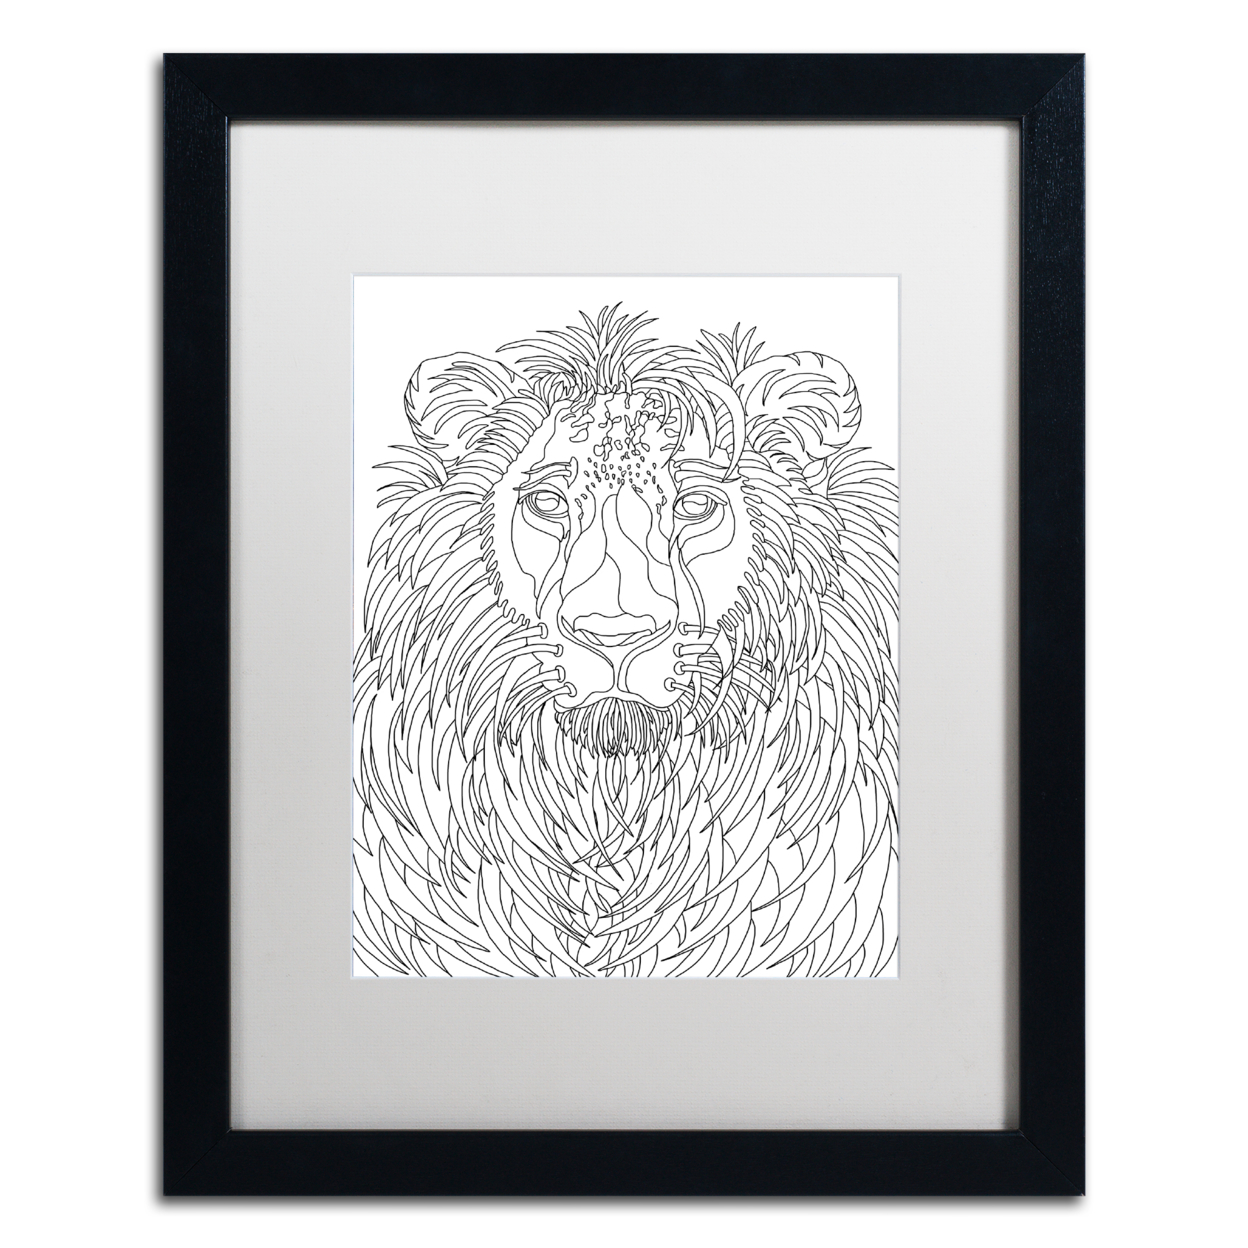 Kathy G. Ahrens 'Lion' Black Wooden Framed Art 18 X 22 Inches